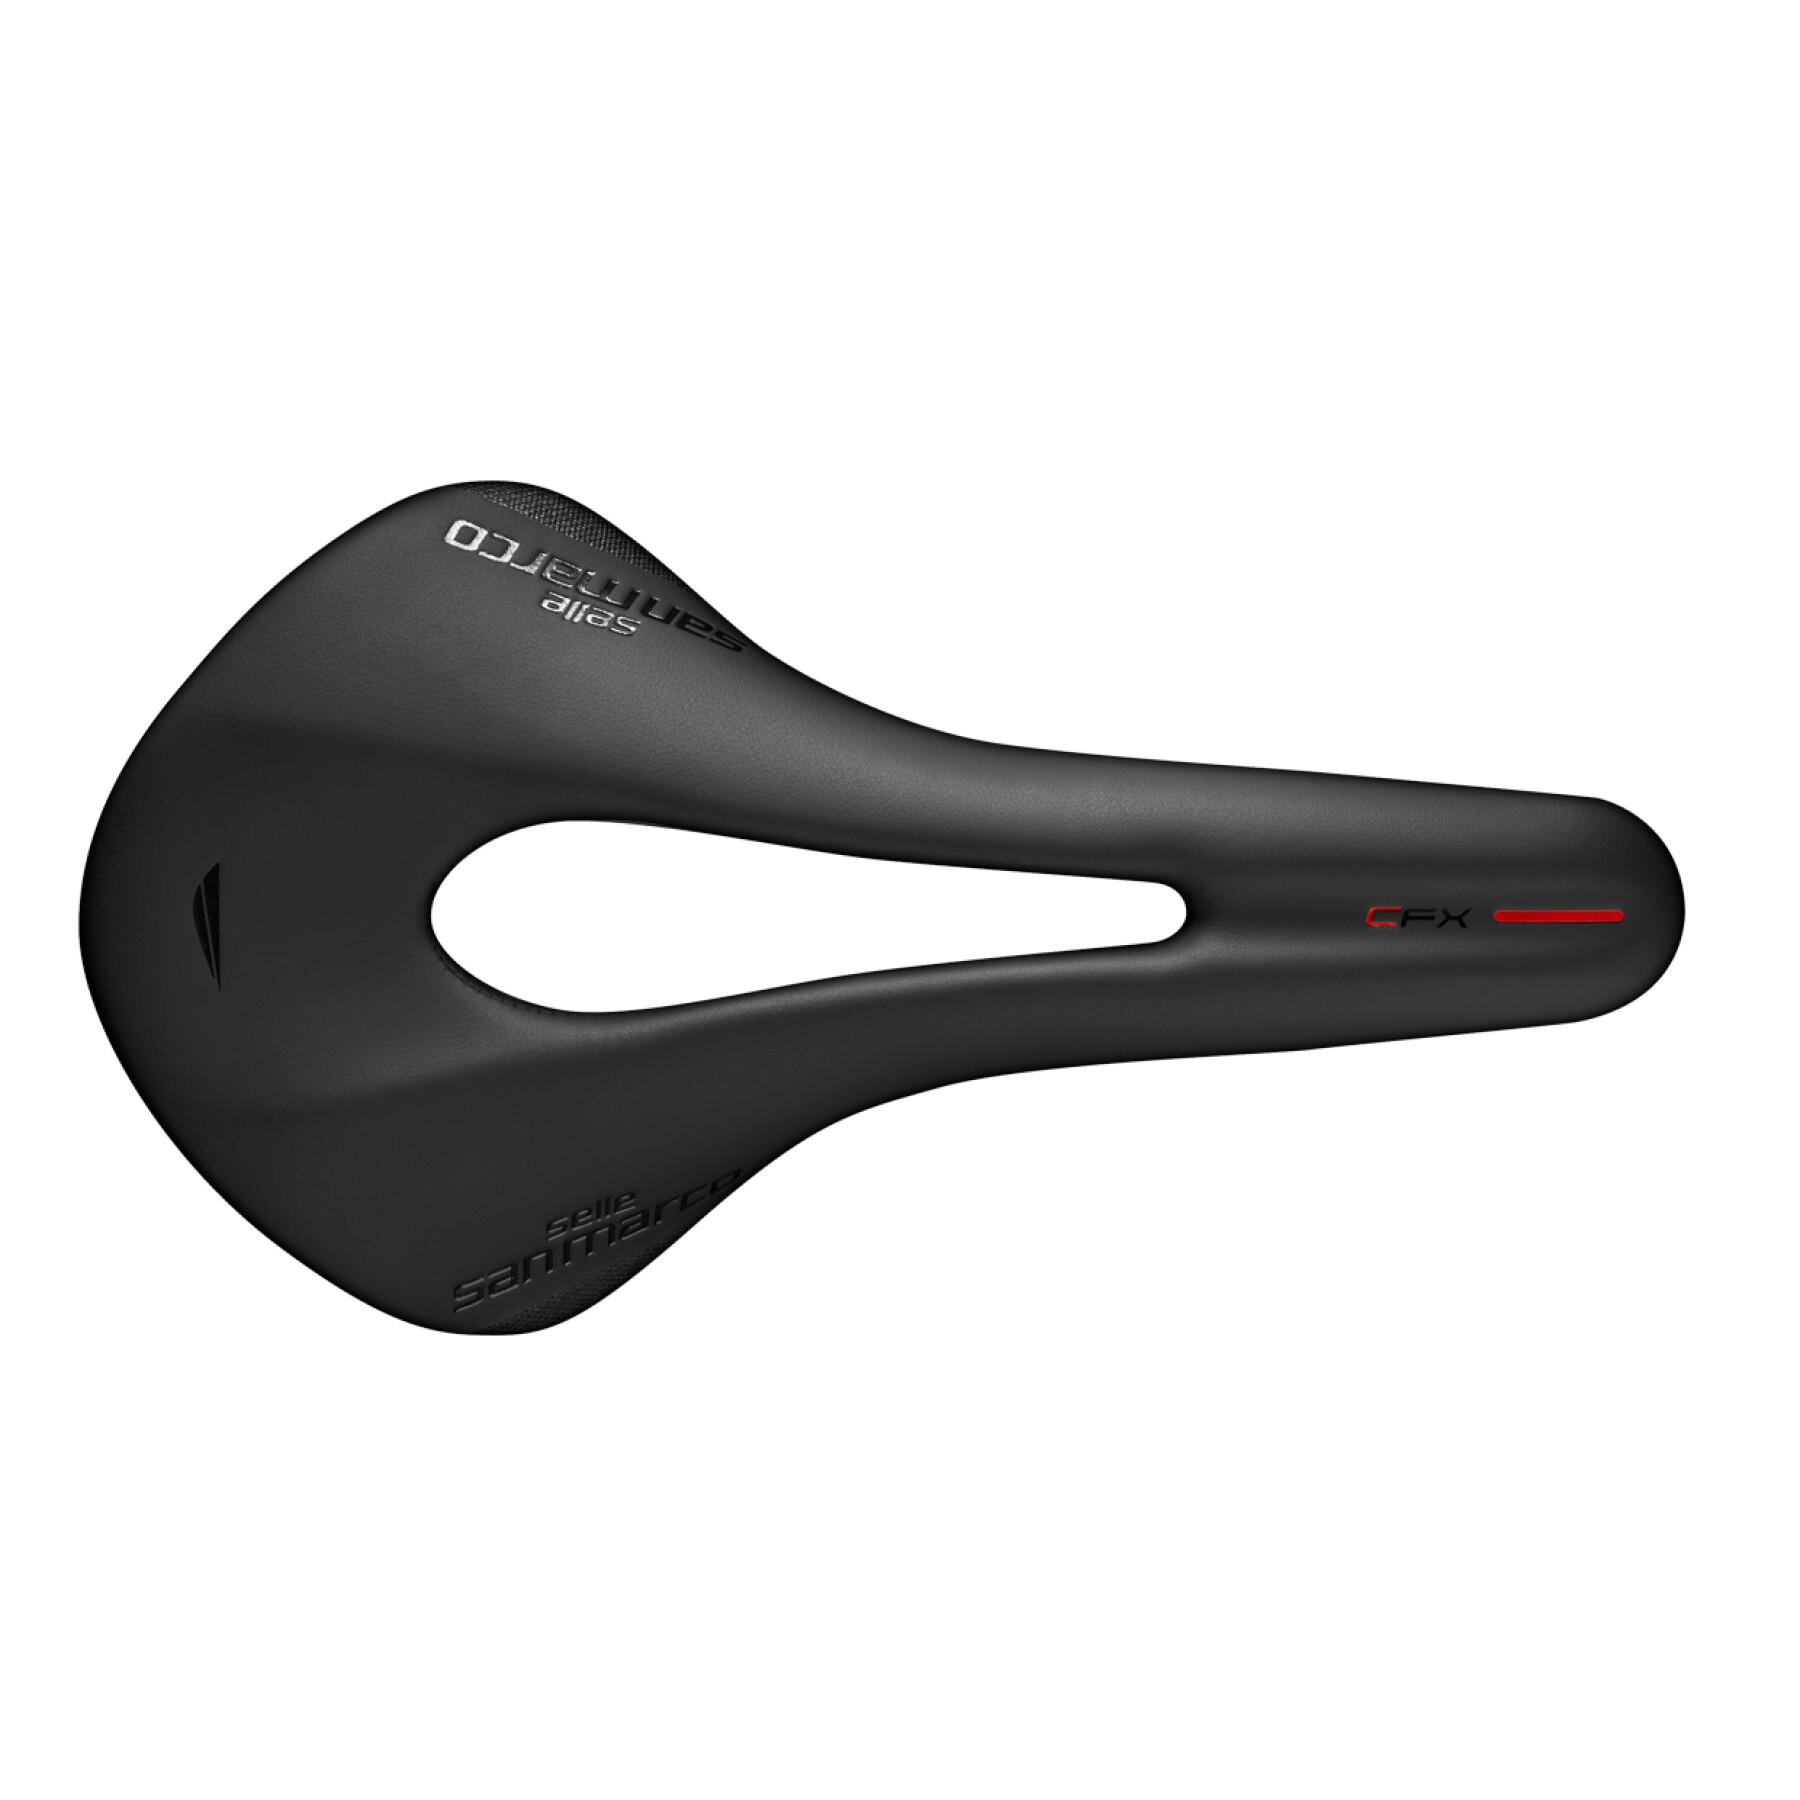 Sella Selle San Marco Allroad Open-Fit Carbon FX